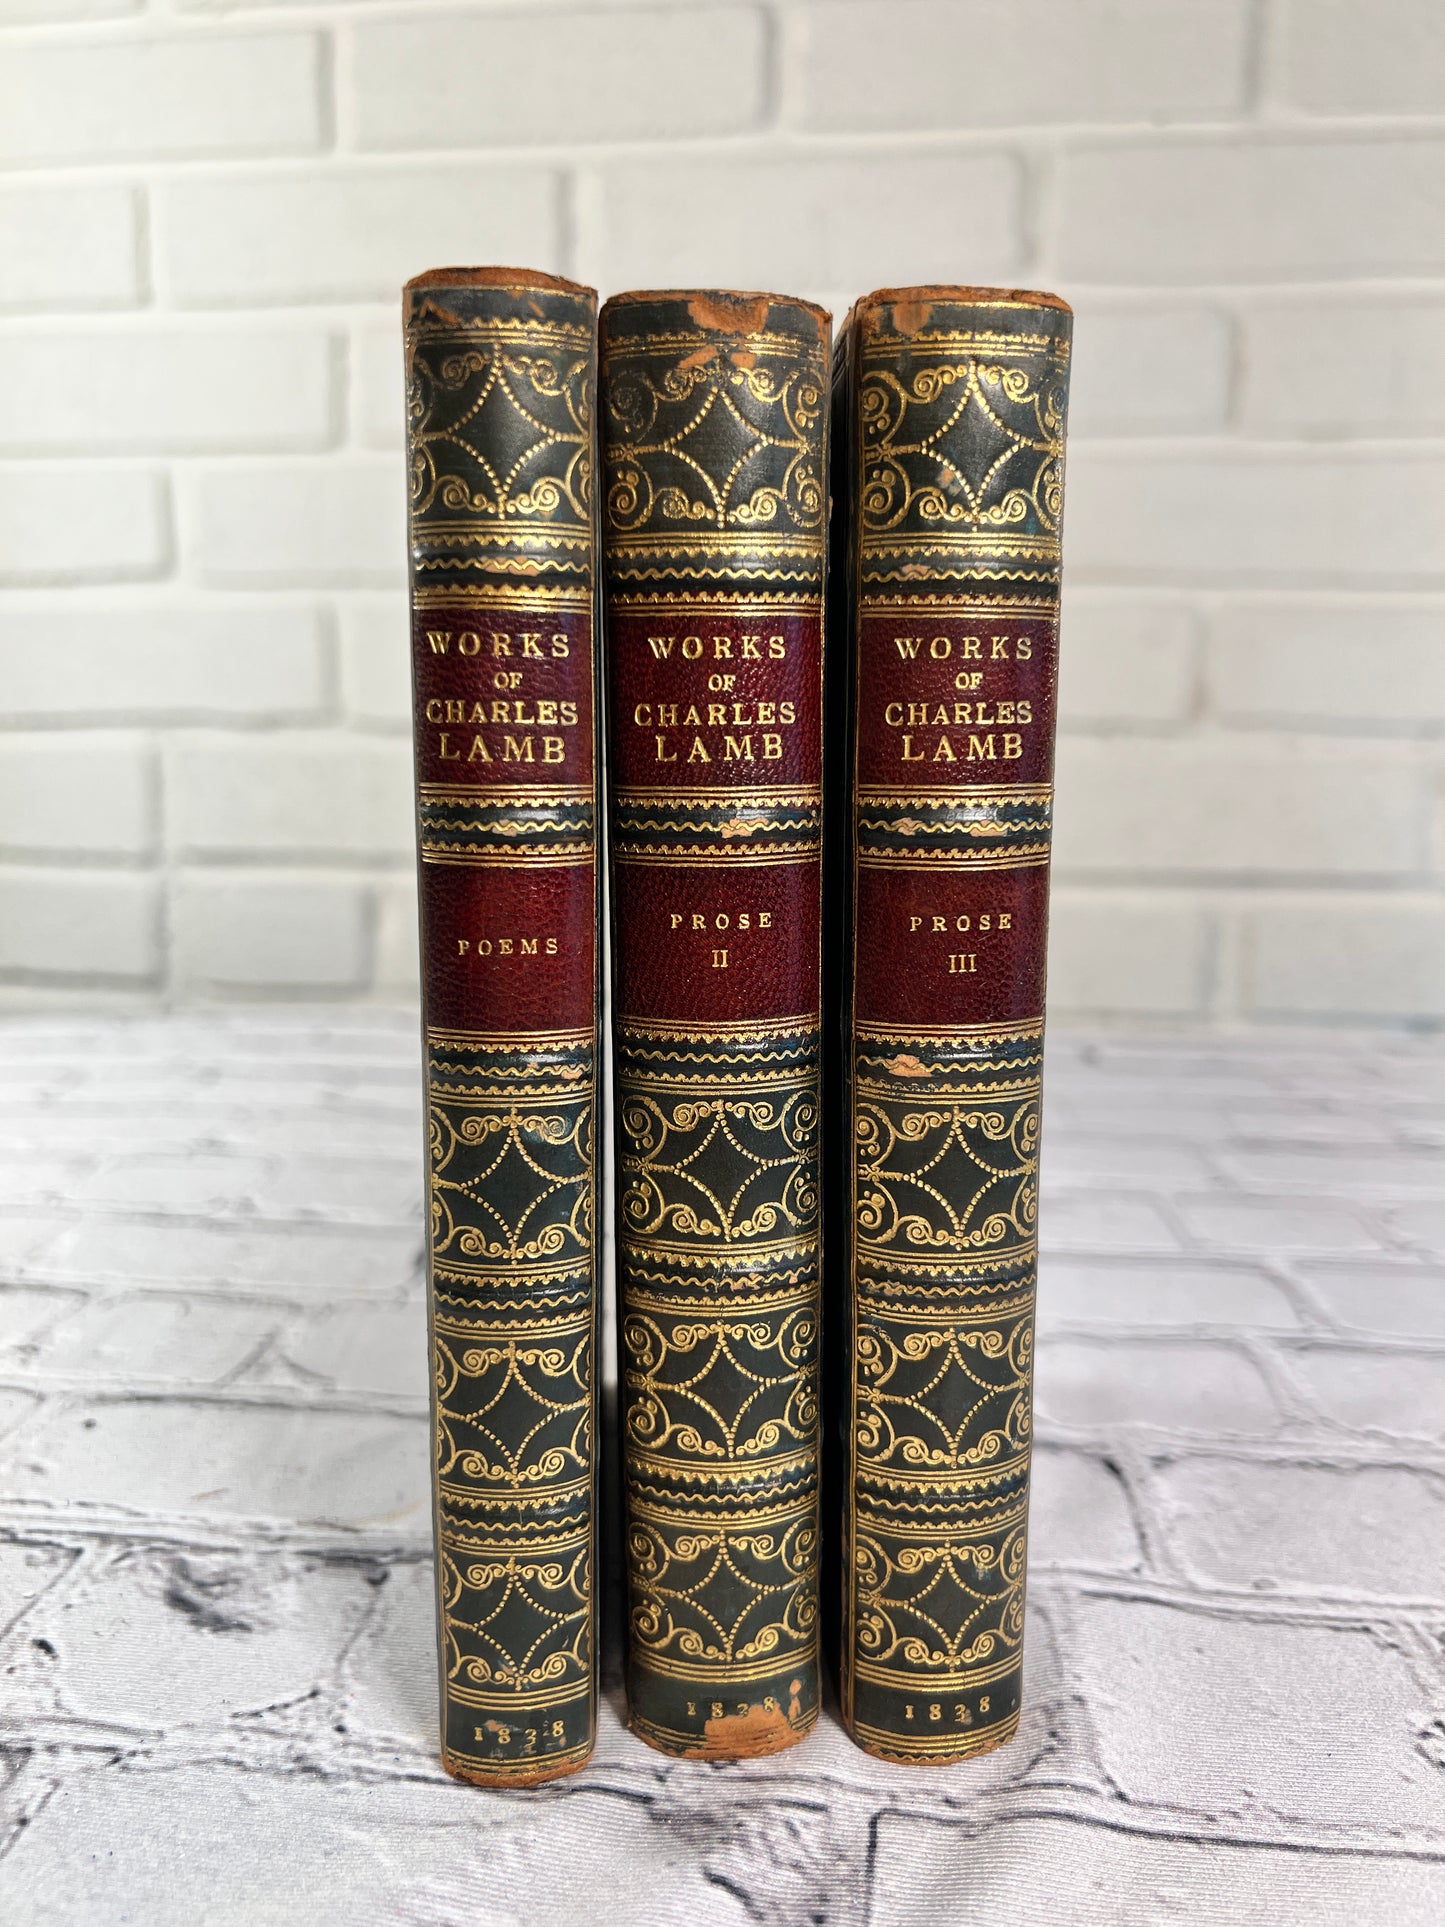 The Works of Charles Lamb (Poetry and Prose, 3 Volumes) [1838 · 3rd Edition]